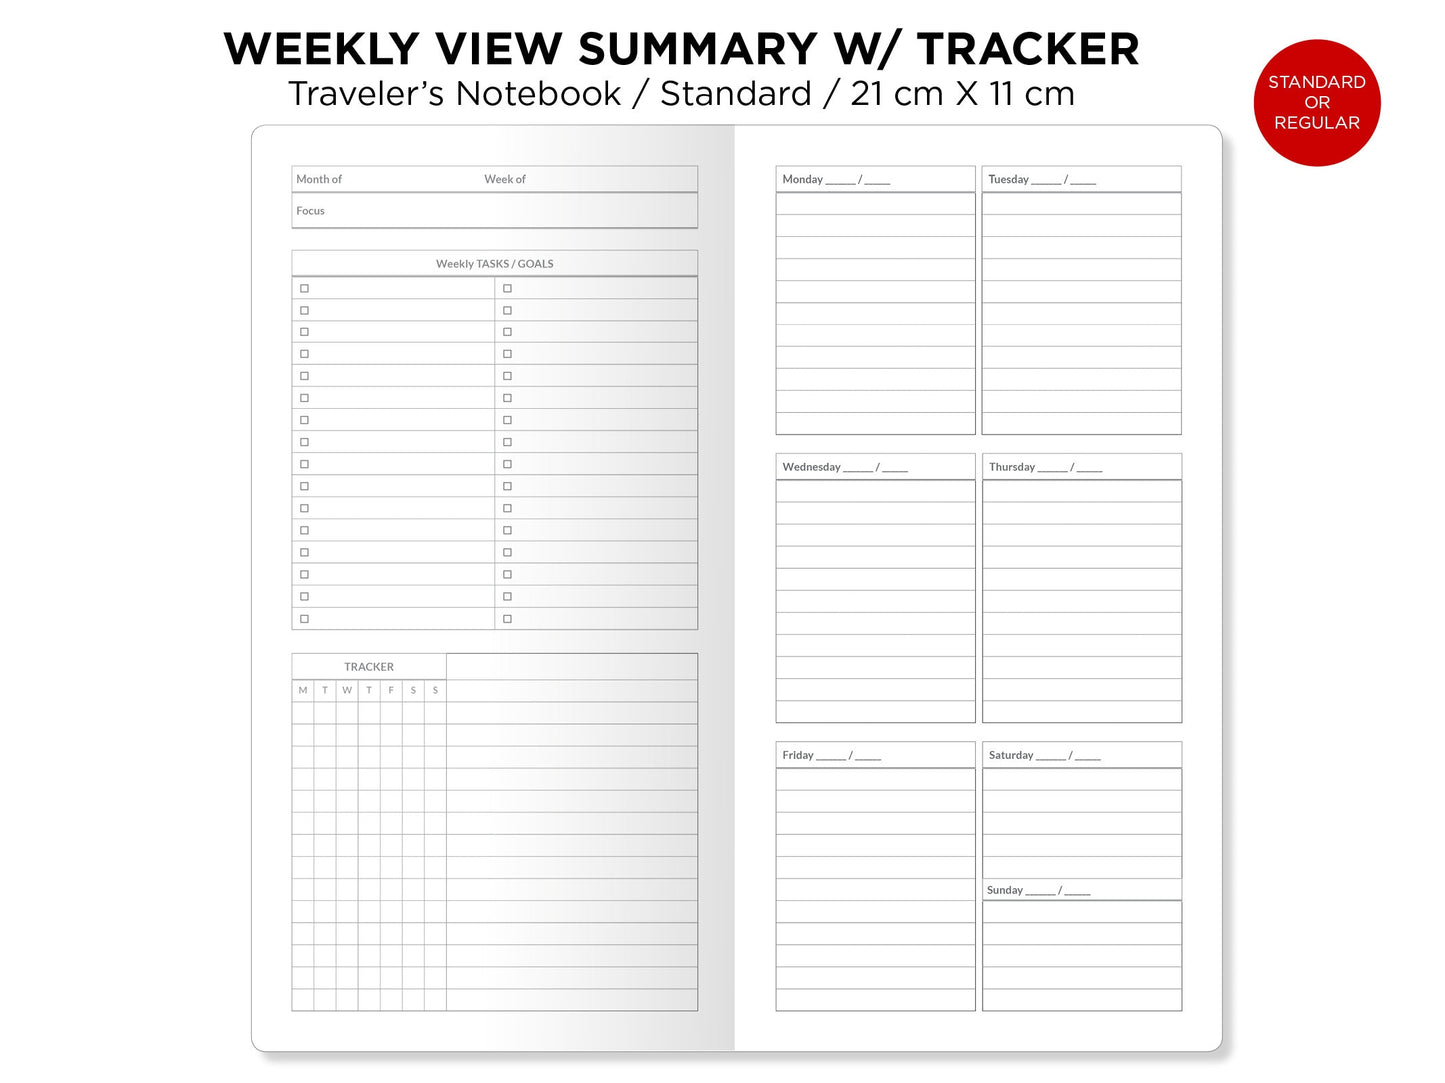 Standard TN WEEKLY View Summary Printable Insert Traveler's Notebook with Tasks, Tracker